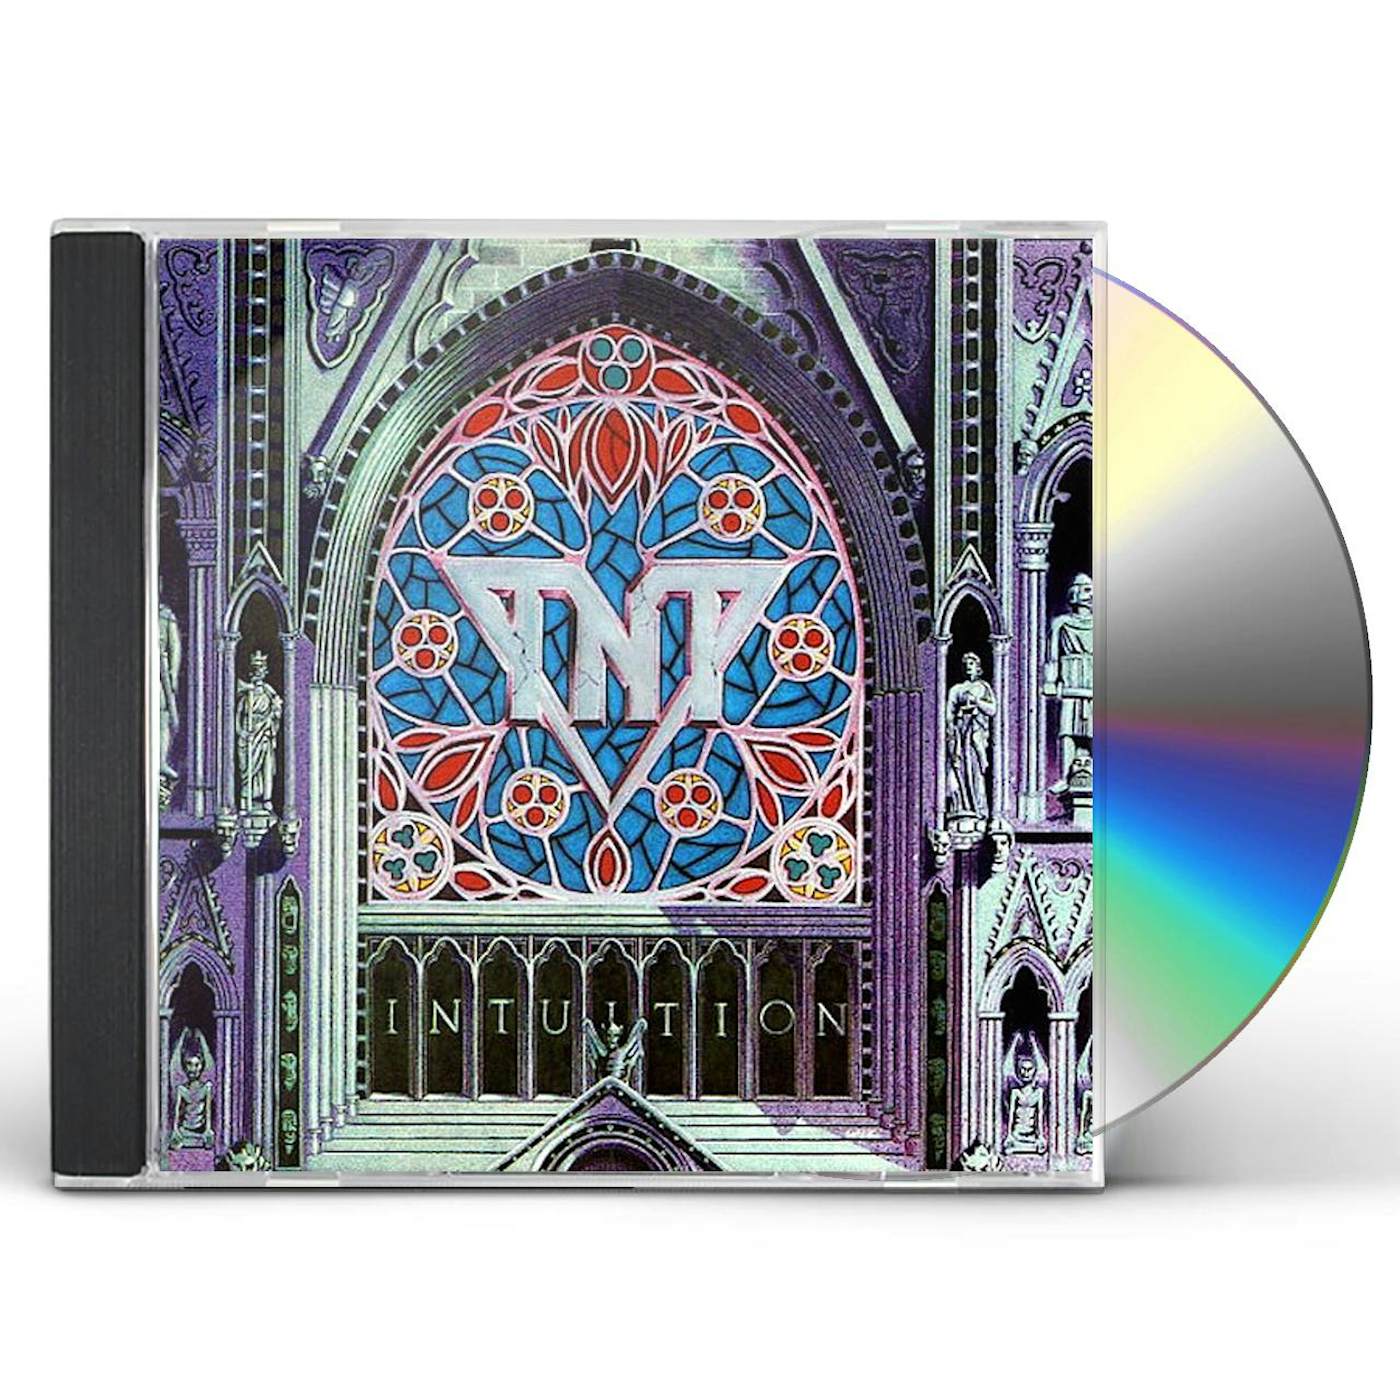 TNT INTUITION CD